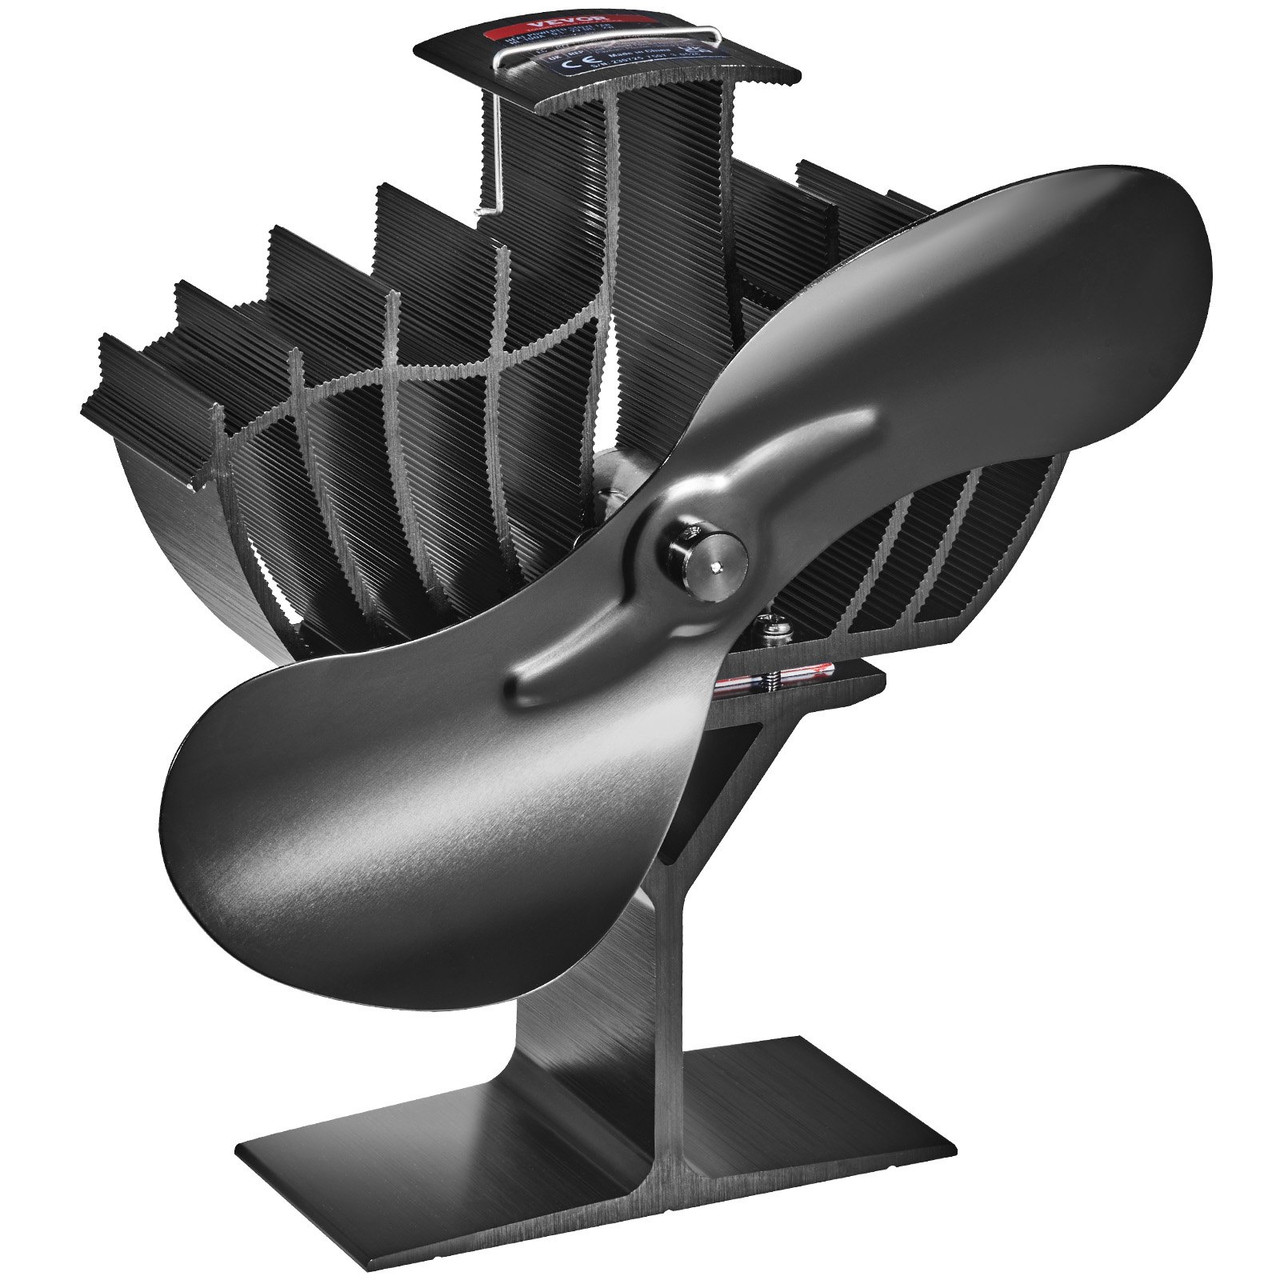 VEVOR Wood Stove Fan Heat Powered, Quiet Fireplace Fans for Wood/Log Burner/Heater, 260 CFM Max. Airflow Non Electric, Aluminum Alloy Circulating Warm Air Saving Fuel, 2 Blades, 7.1'' x 4.2'' x 7.7''